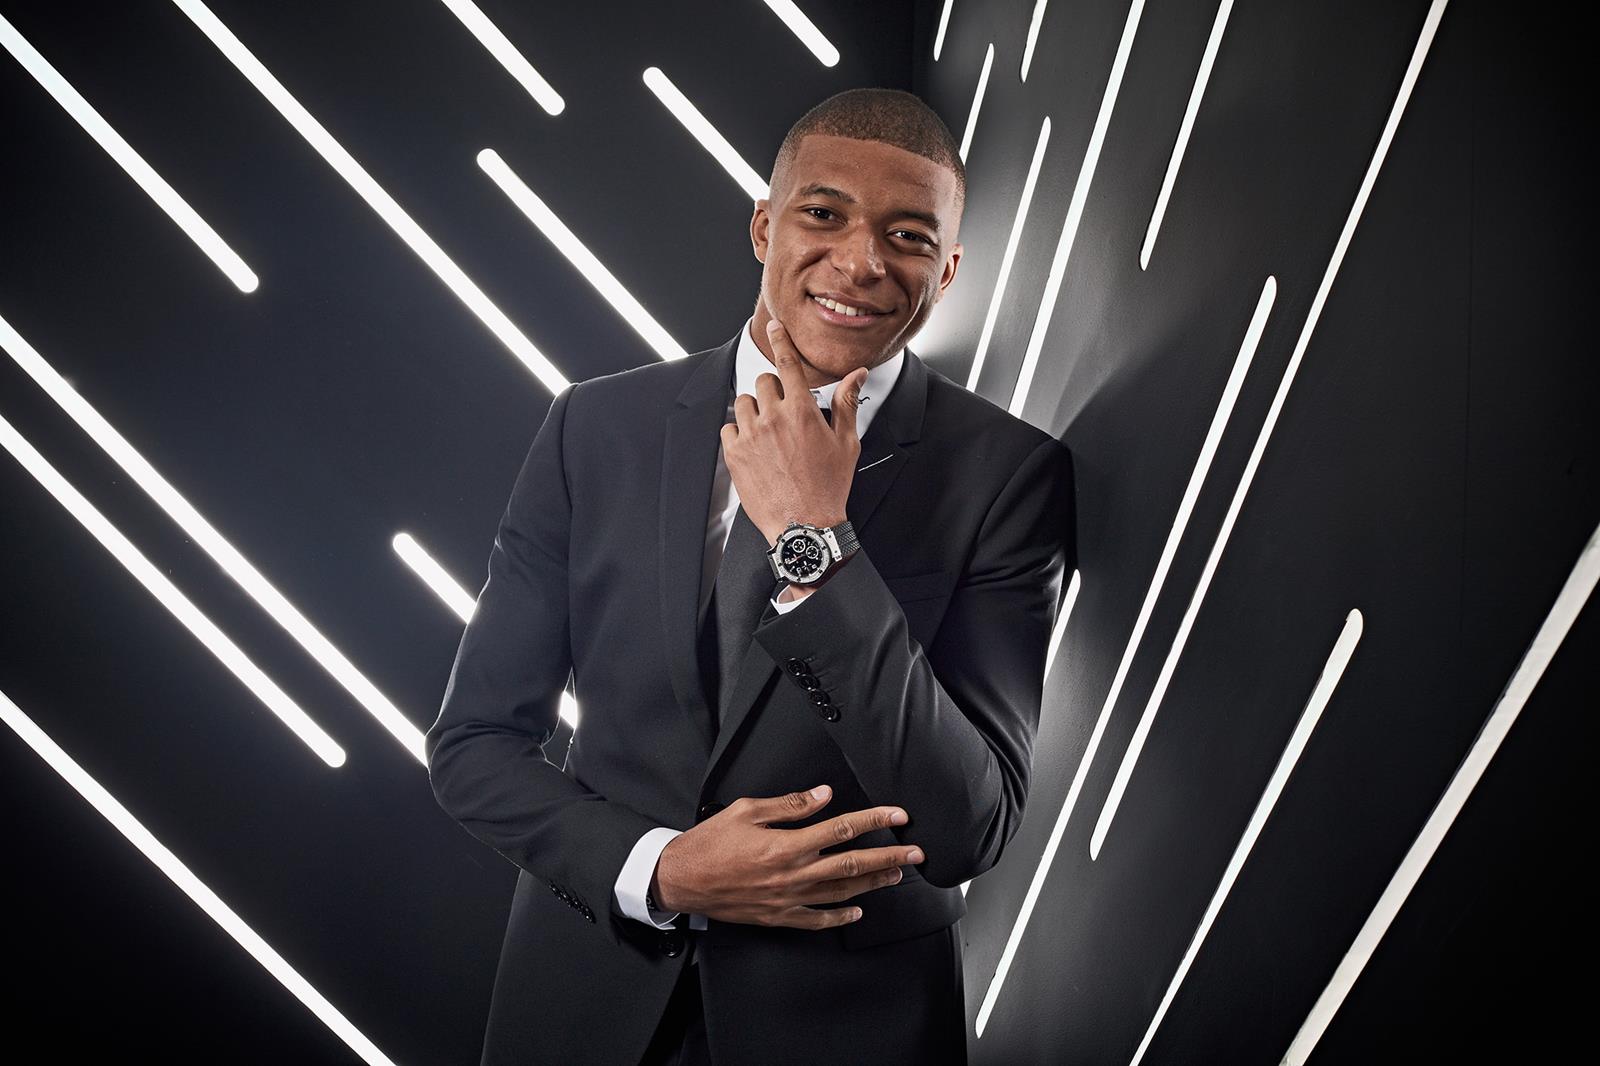 LONDON, ENGLAND - SEPTEMBER 24: Kylian Mbappe of France and Paris Saint-Germain is pictured inside the photo booth prior to The Best FIFA Football Awards at Royal Festival Hall on September 24, 2018 in London, England. (Photo by Michael Regan - FIFA/FIFA via Getty Images)